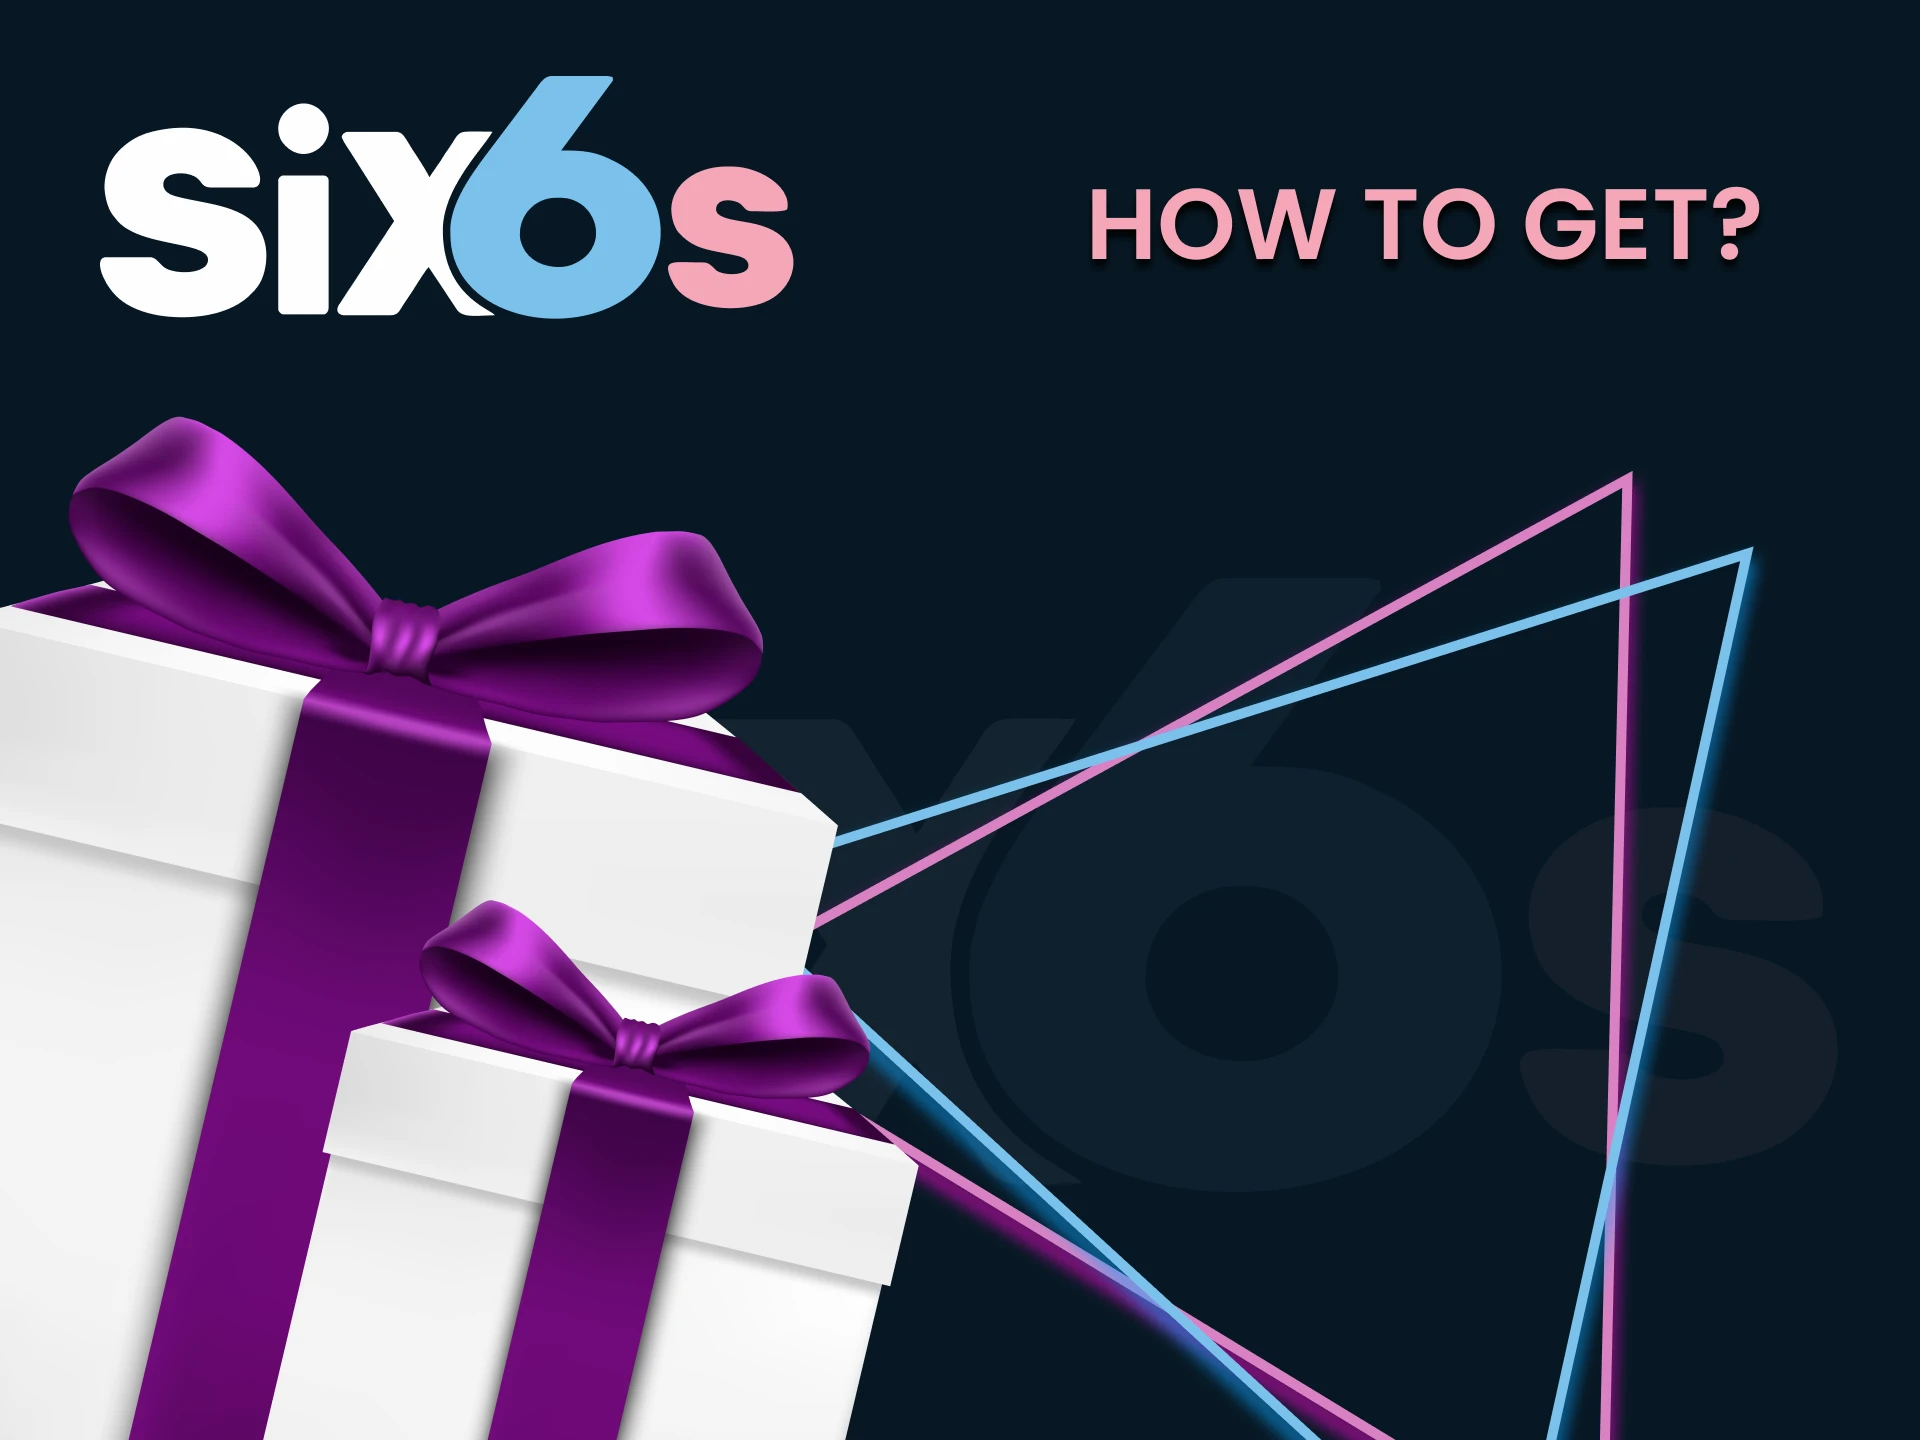 We will tell you how to get a special code from Six6s for a bonus.